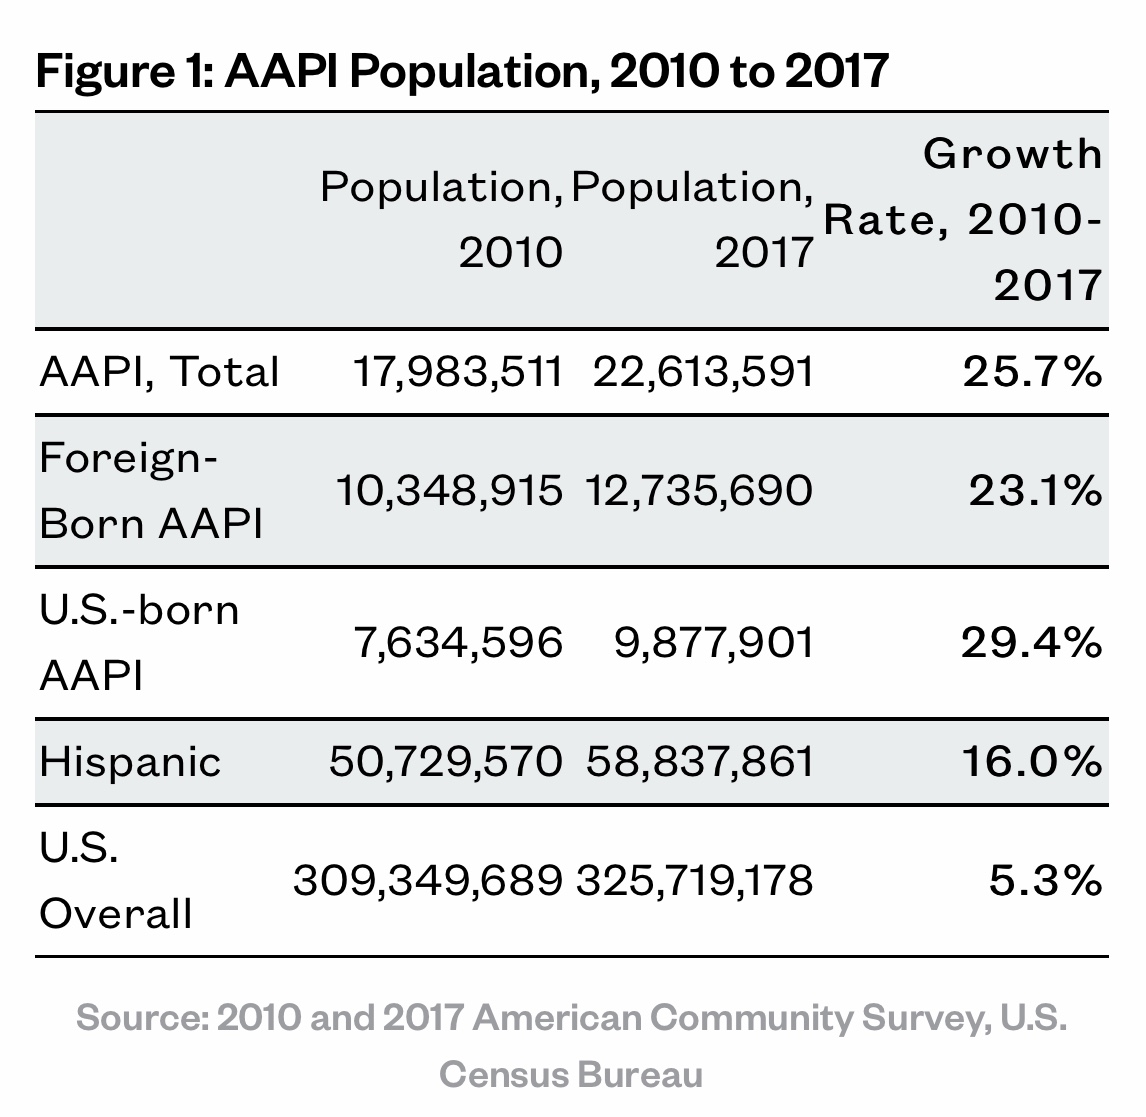 Income by race: why is Asian-American income so high